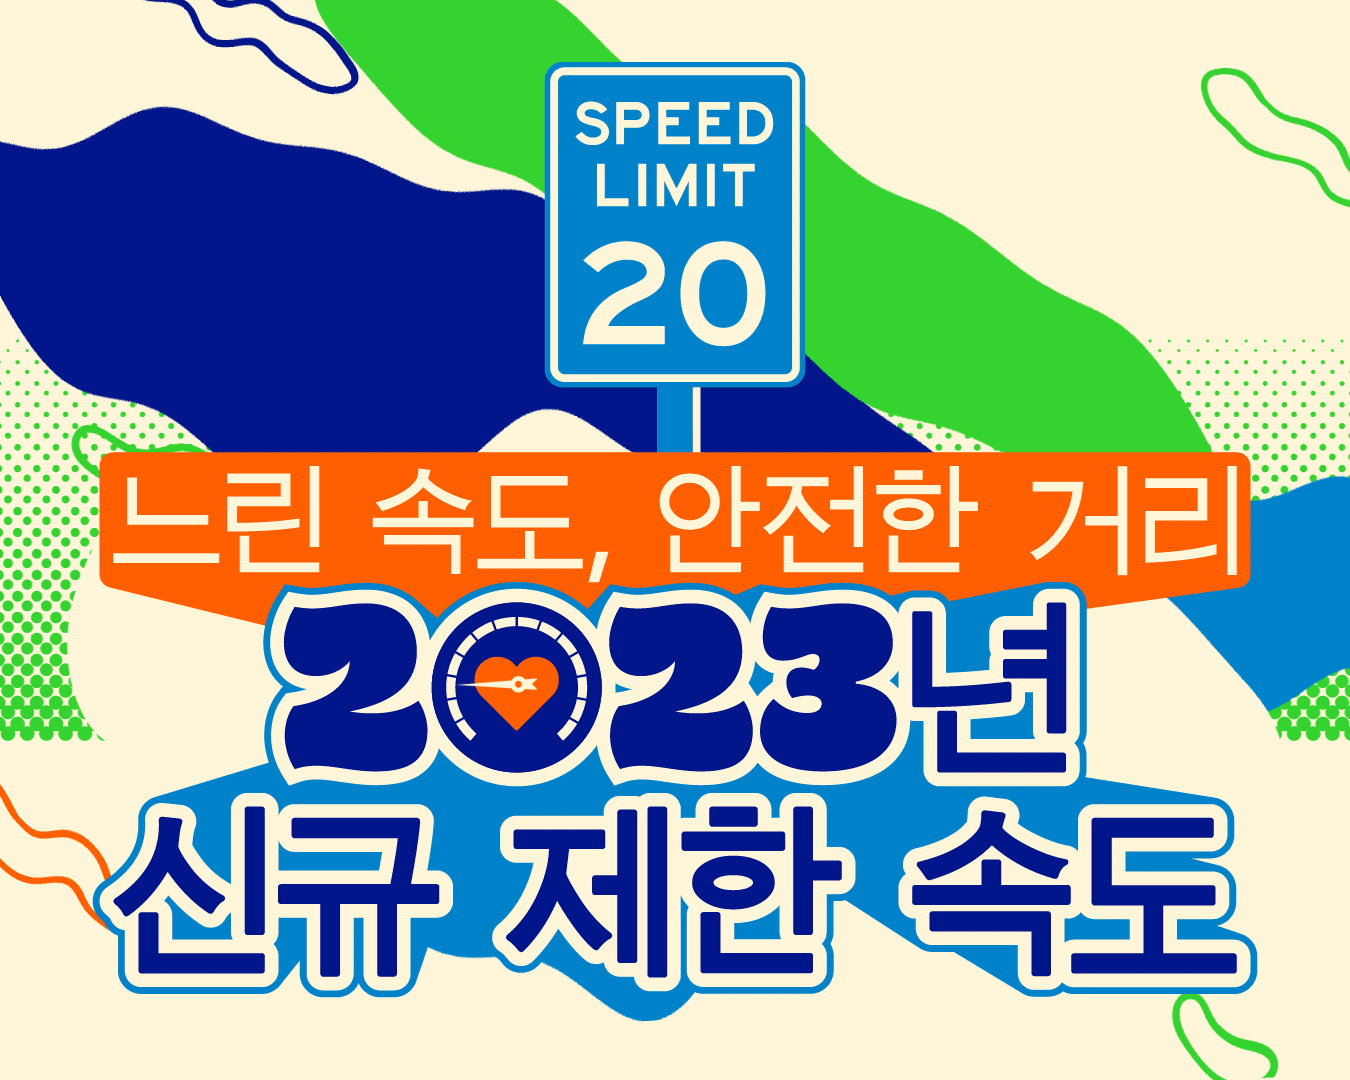 City of Tacoma speed reduction campaign animated GIF in Korean